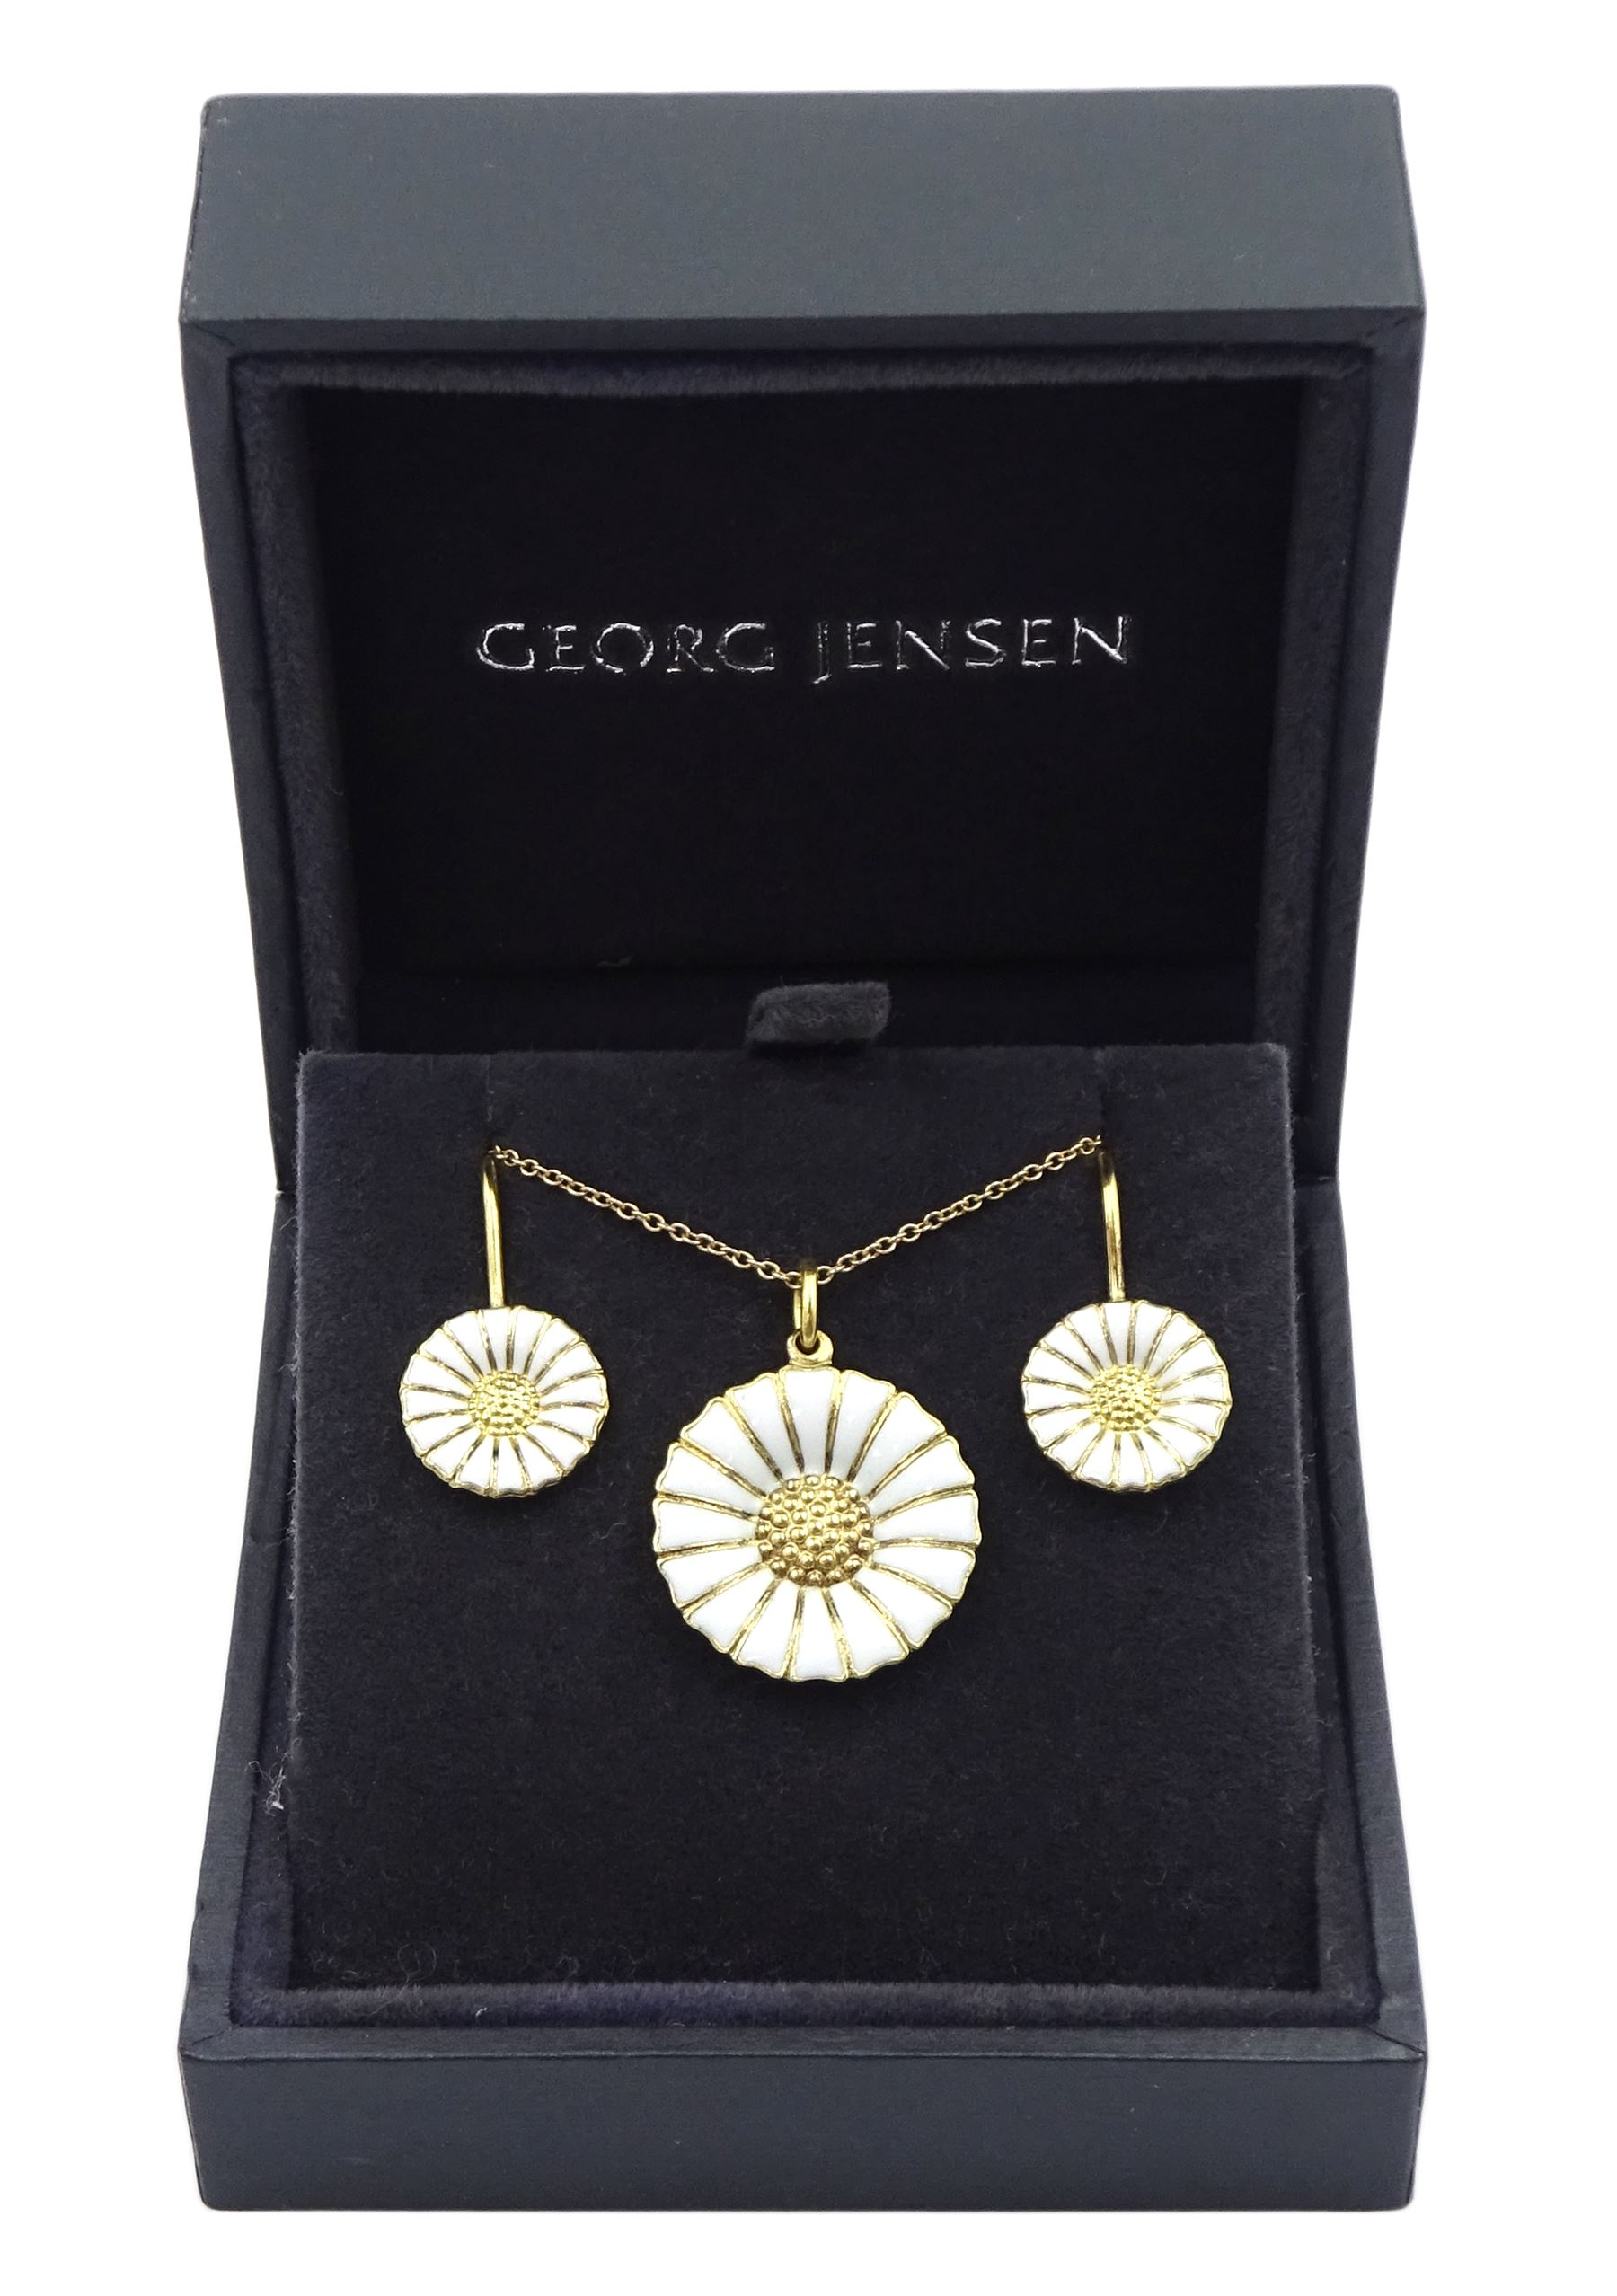 Silver-gilt white enamel daisy pendant necklace and matching pair of pendant earrings by Georg Jense - Image 2 of 7